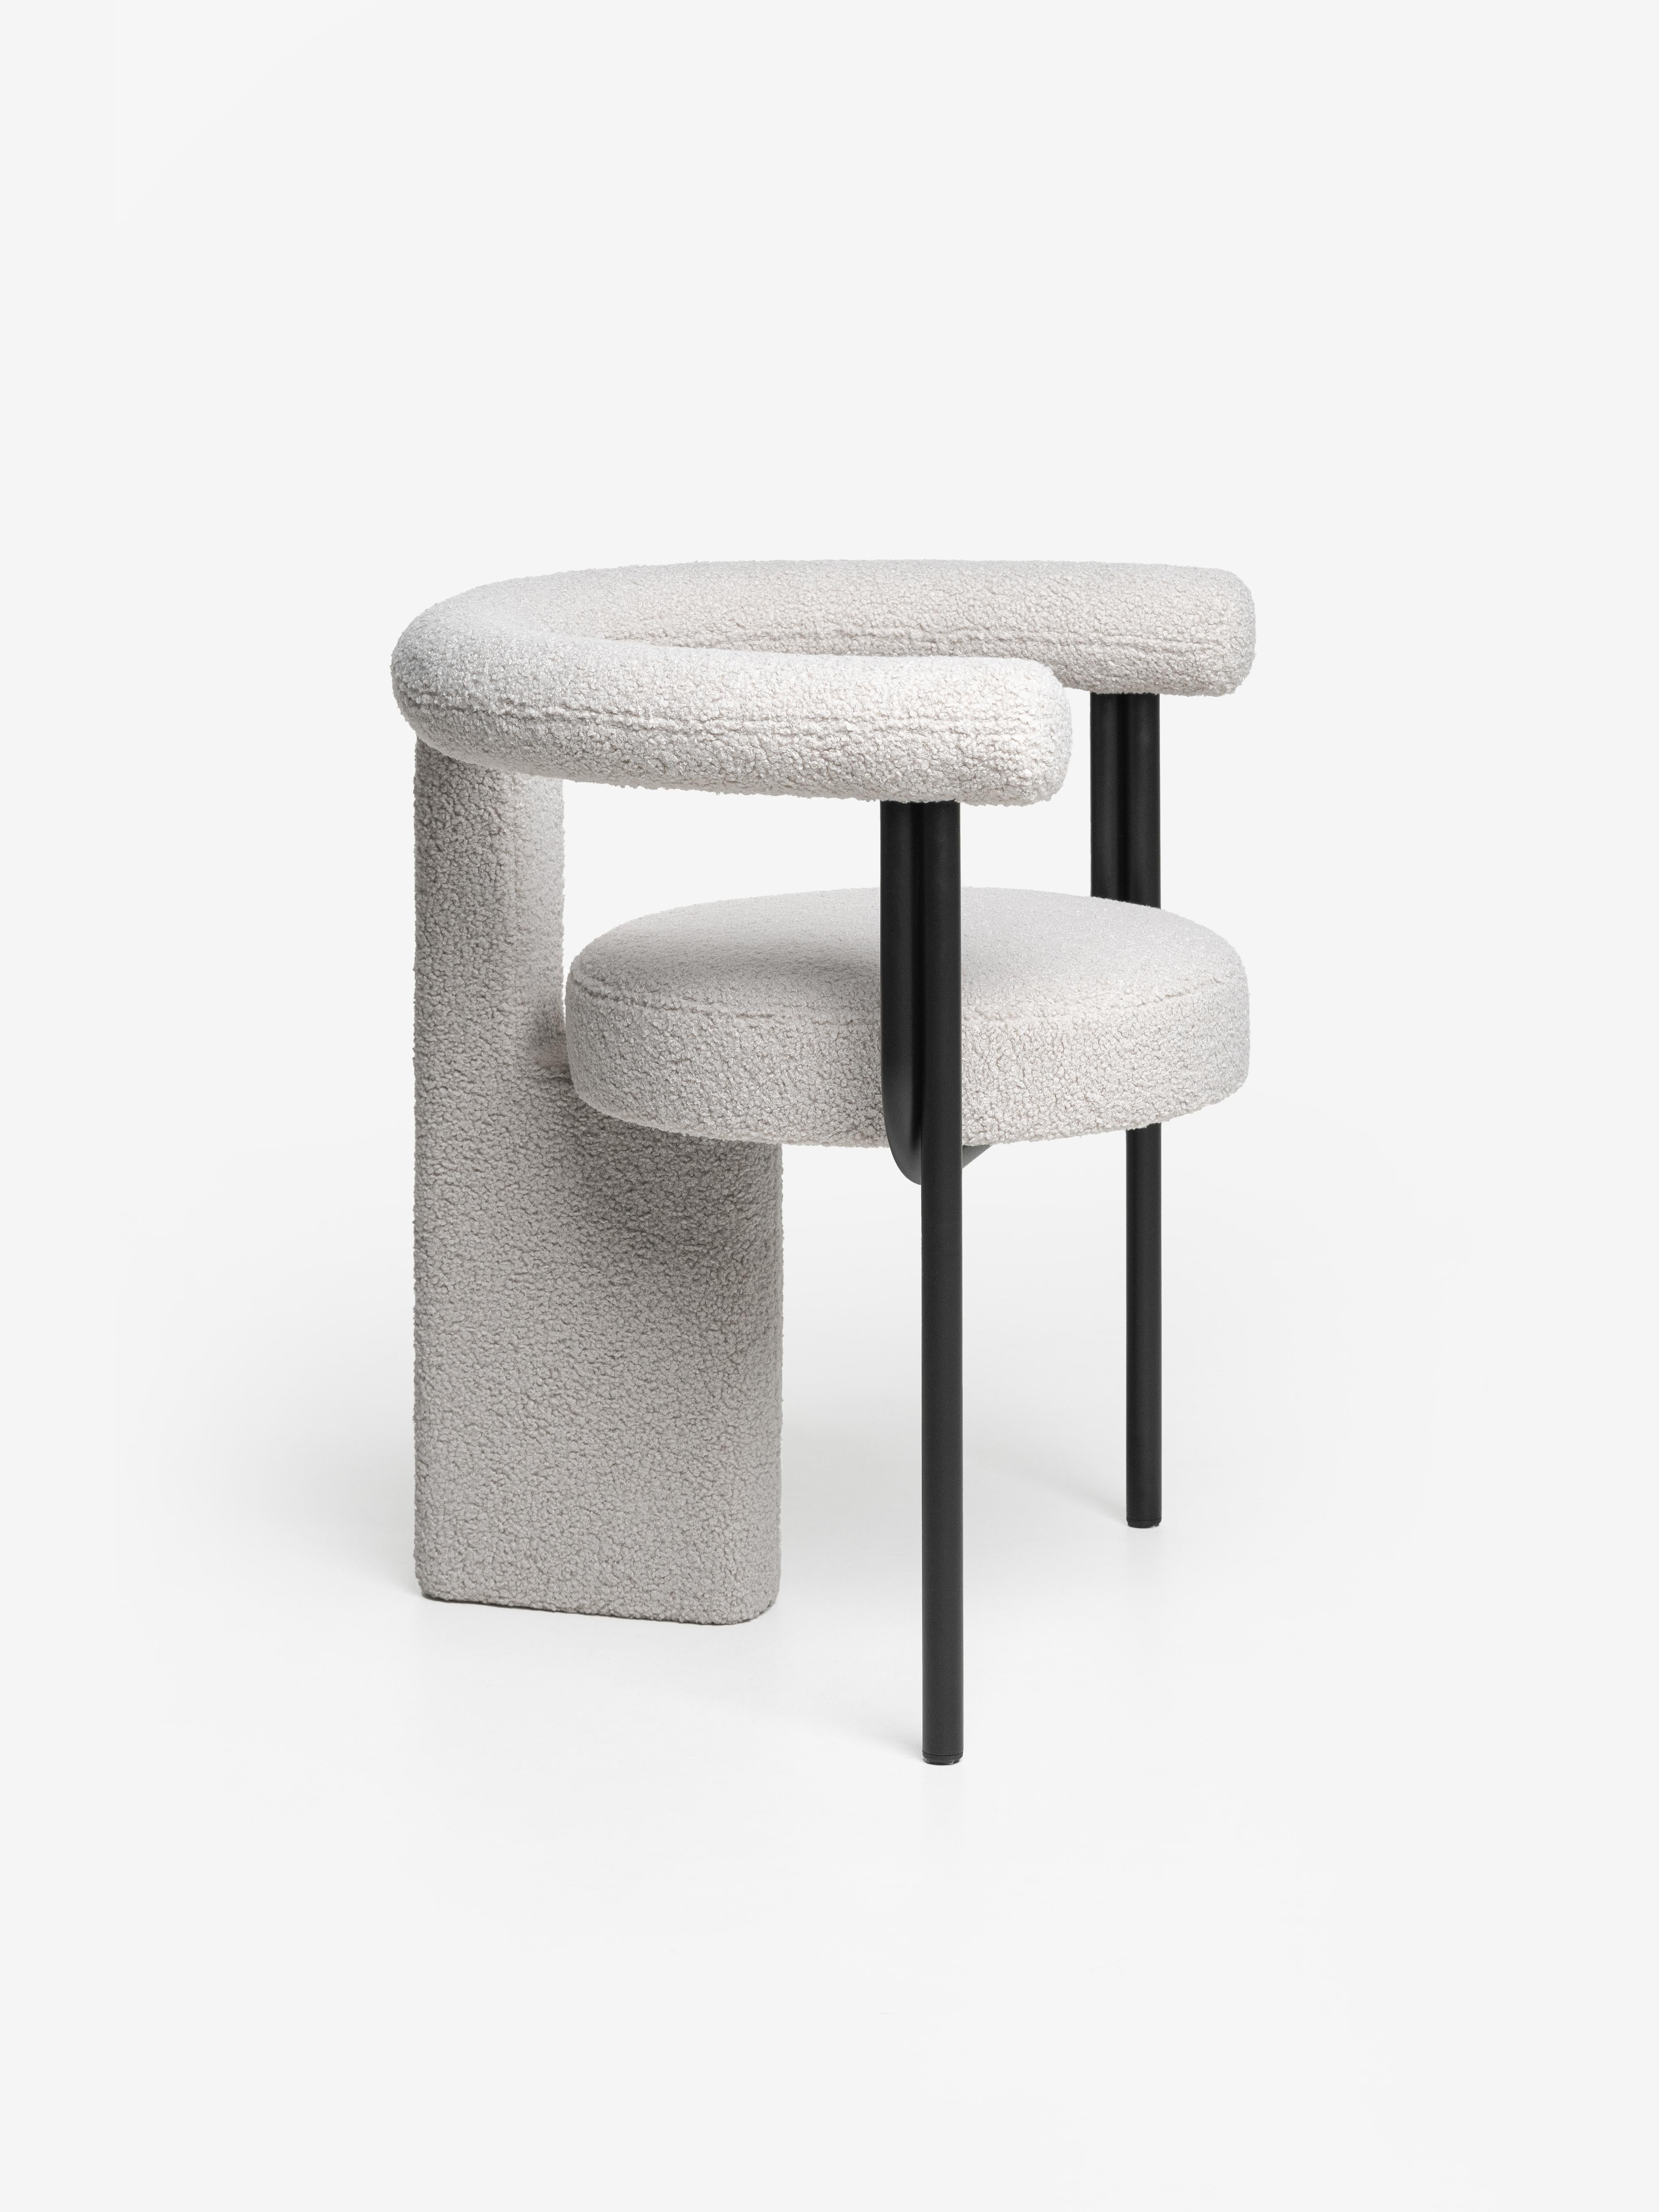 Dining chair Balance invites us to relax and try to find so much needed balance in our life. 
Design of this chair is inspired by the art of “rock balancing”, where natural stones are stacked on top of each other in pillars of varying heights, as if